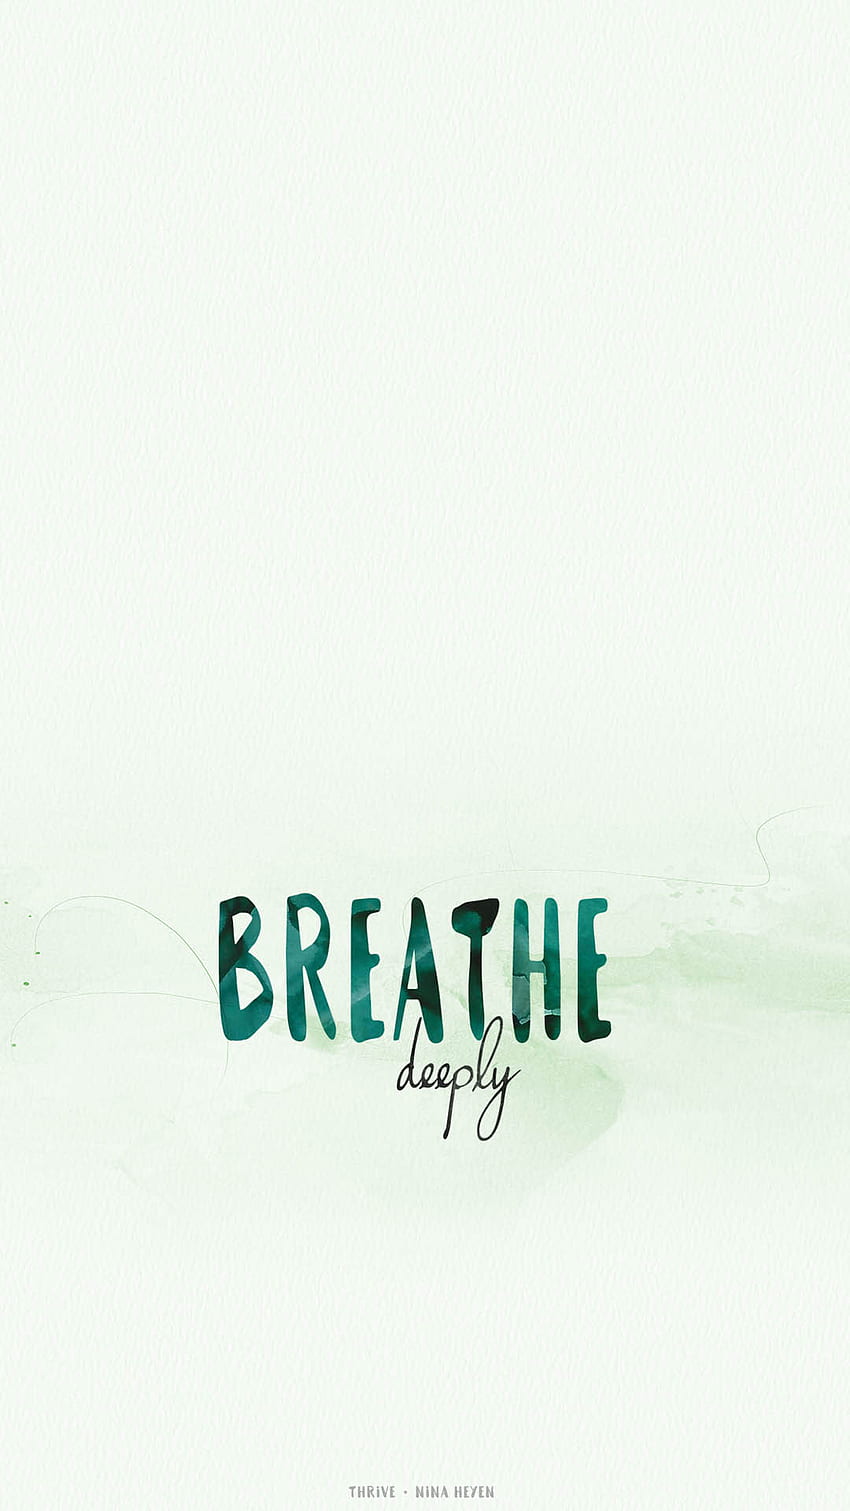 Breathe Deeply. A Poem from the THRIVE Collection, Breathe Phone HD phone wallpaper